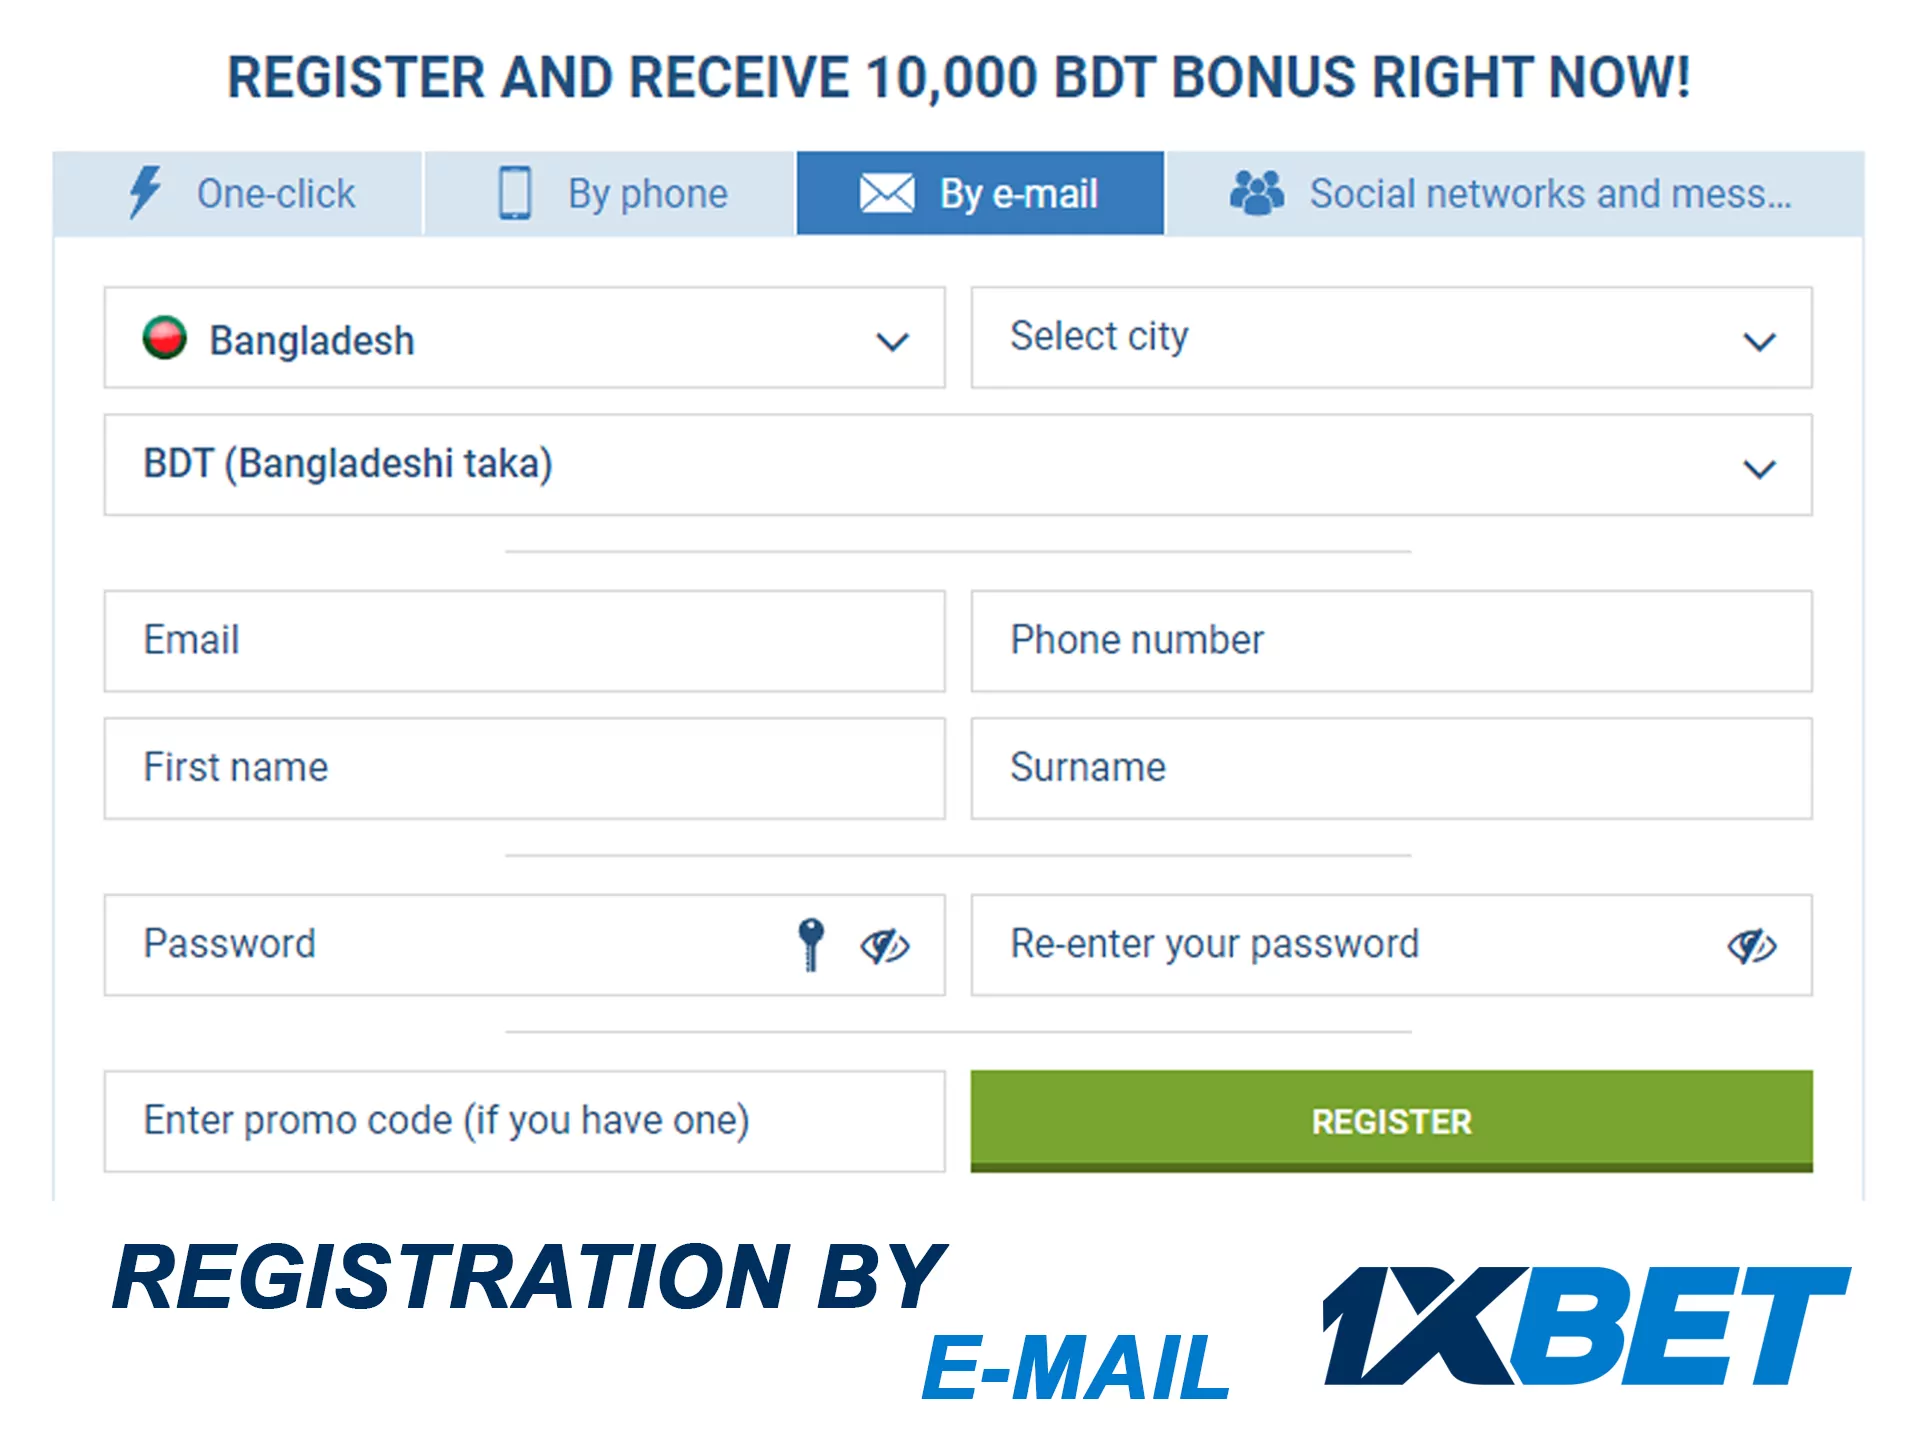 Use your email for registration at 1xbet.